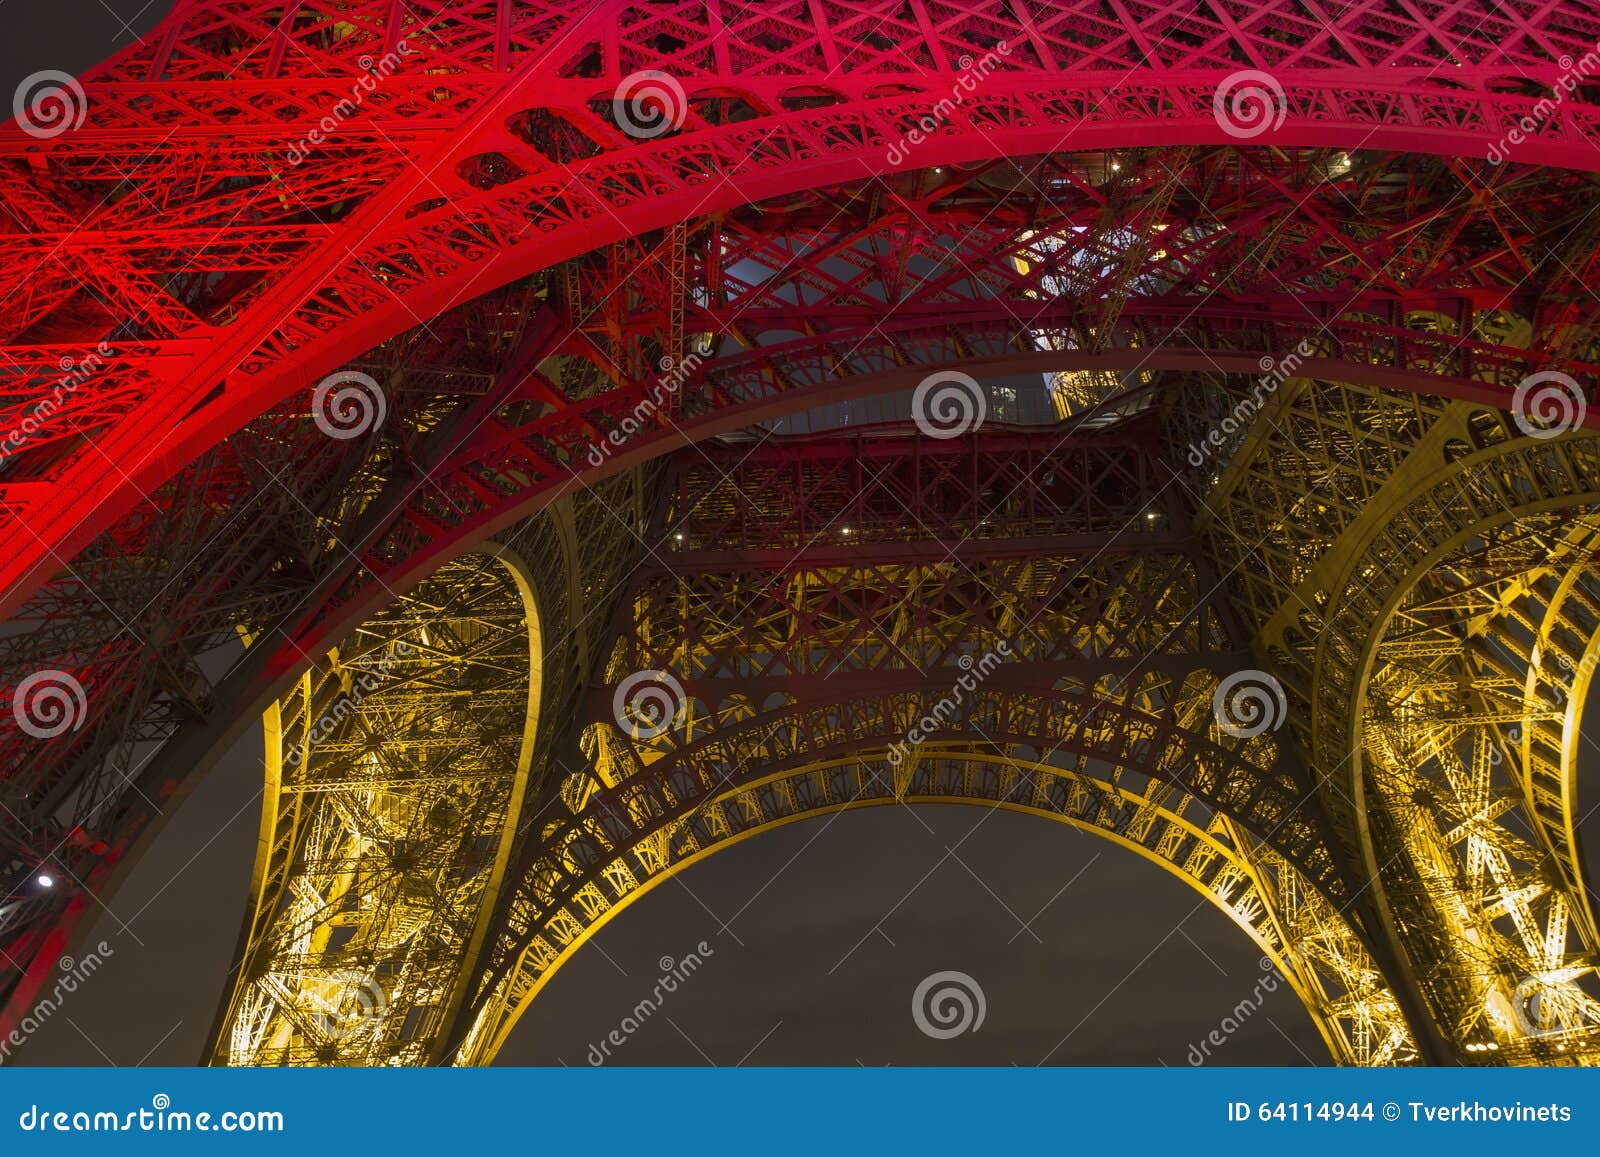 Eiffel Tower In Colors Editorial Stock Image Image Of Flag 64114944